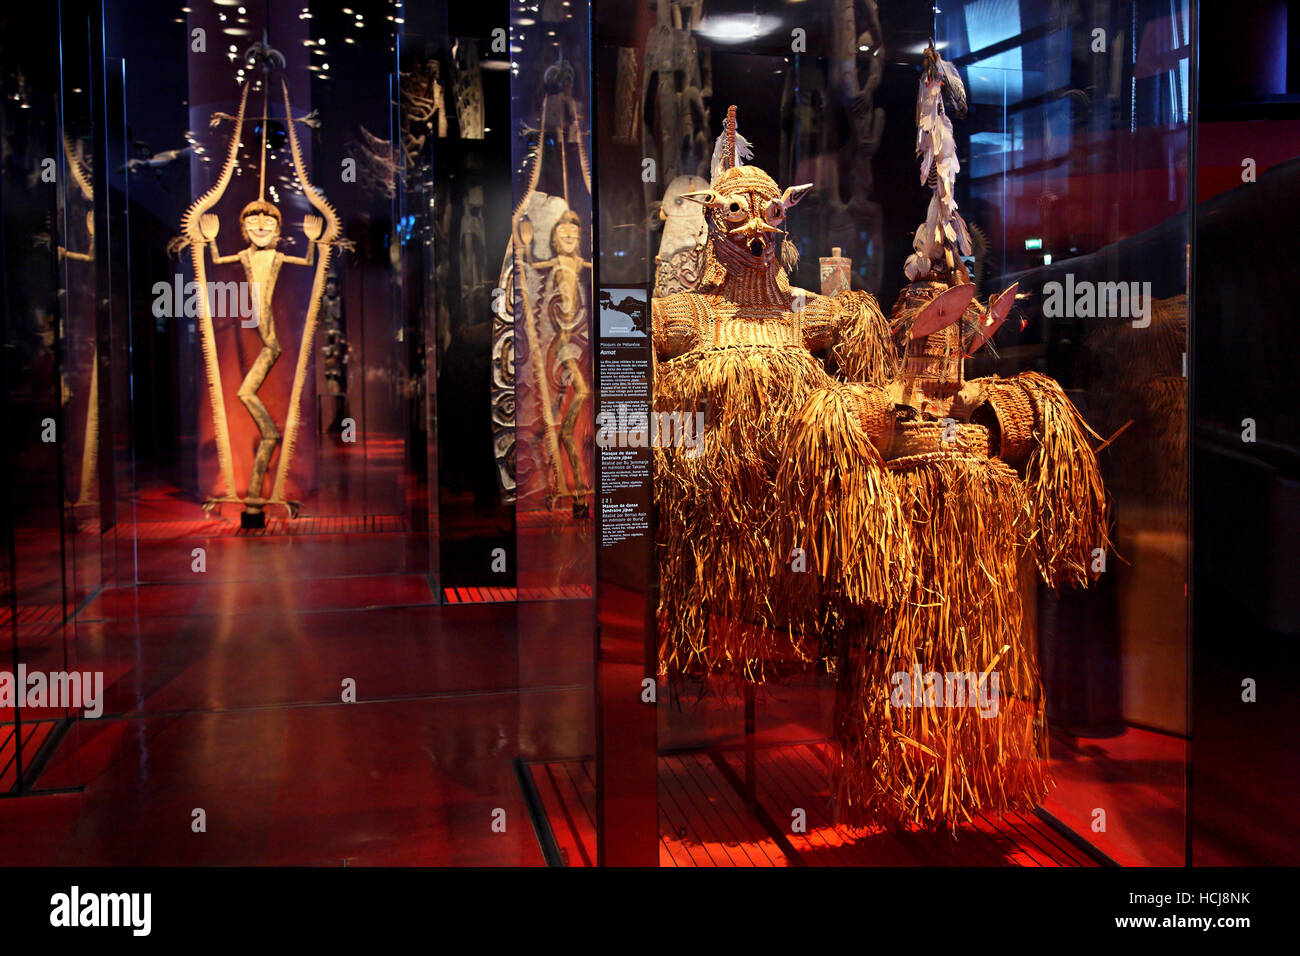 Exhibits from Oceania in the Musee du Quai Branly, Paris, France Stock Photo